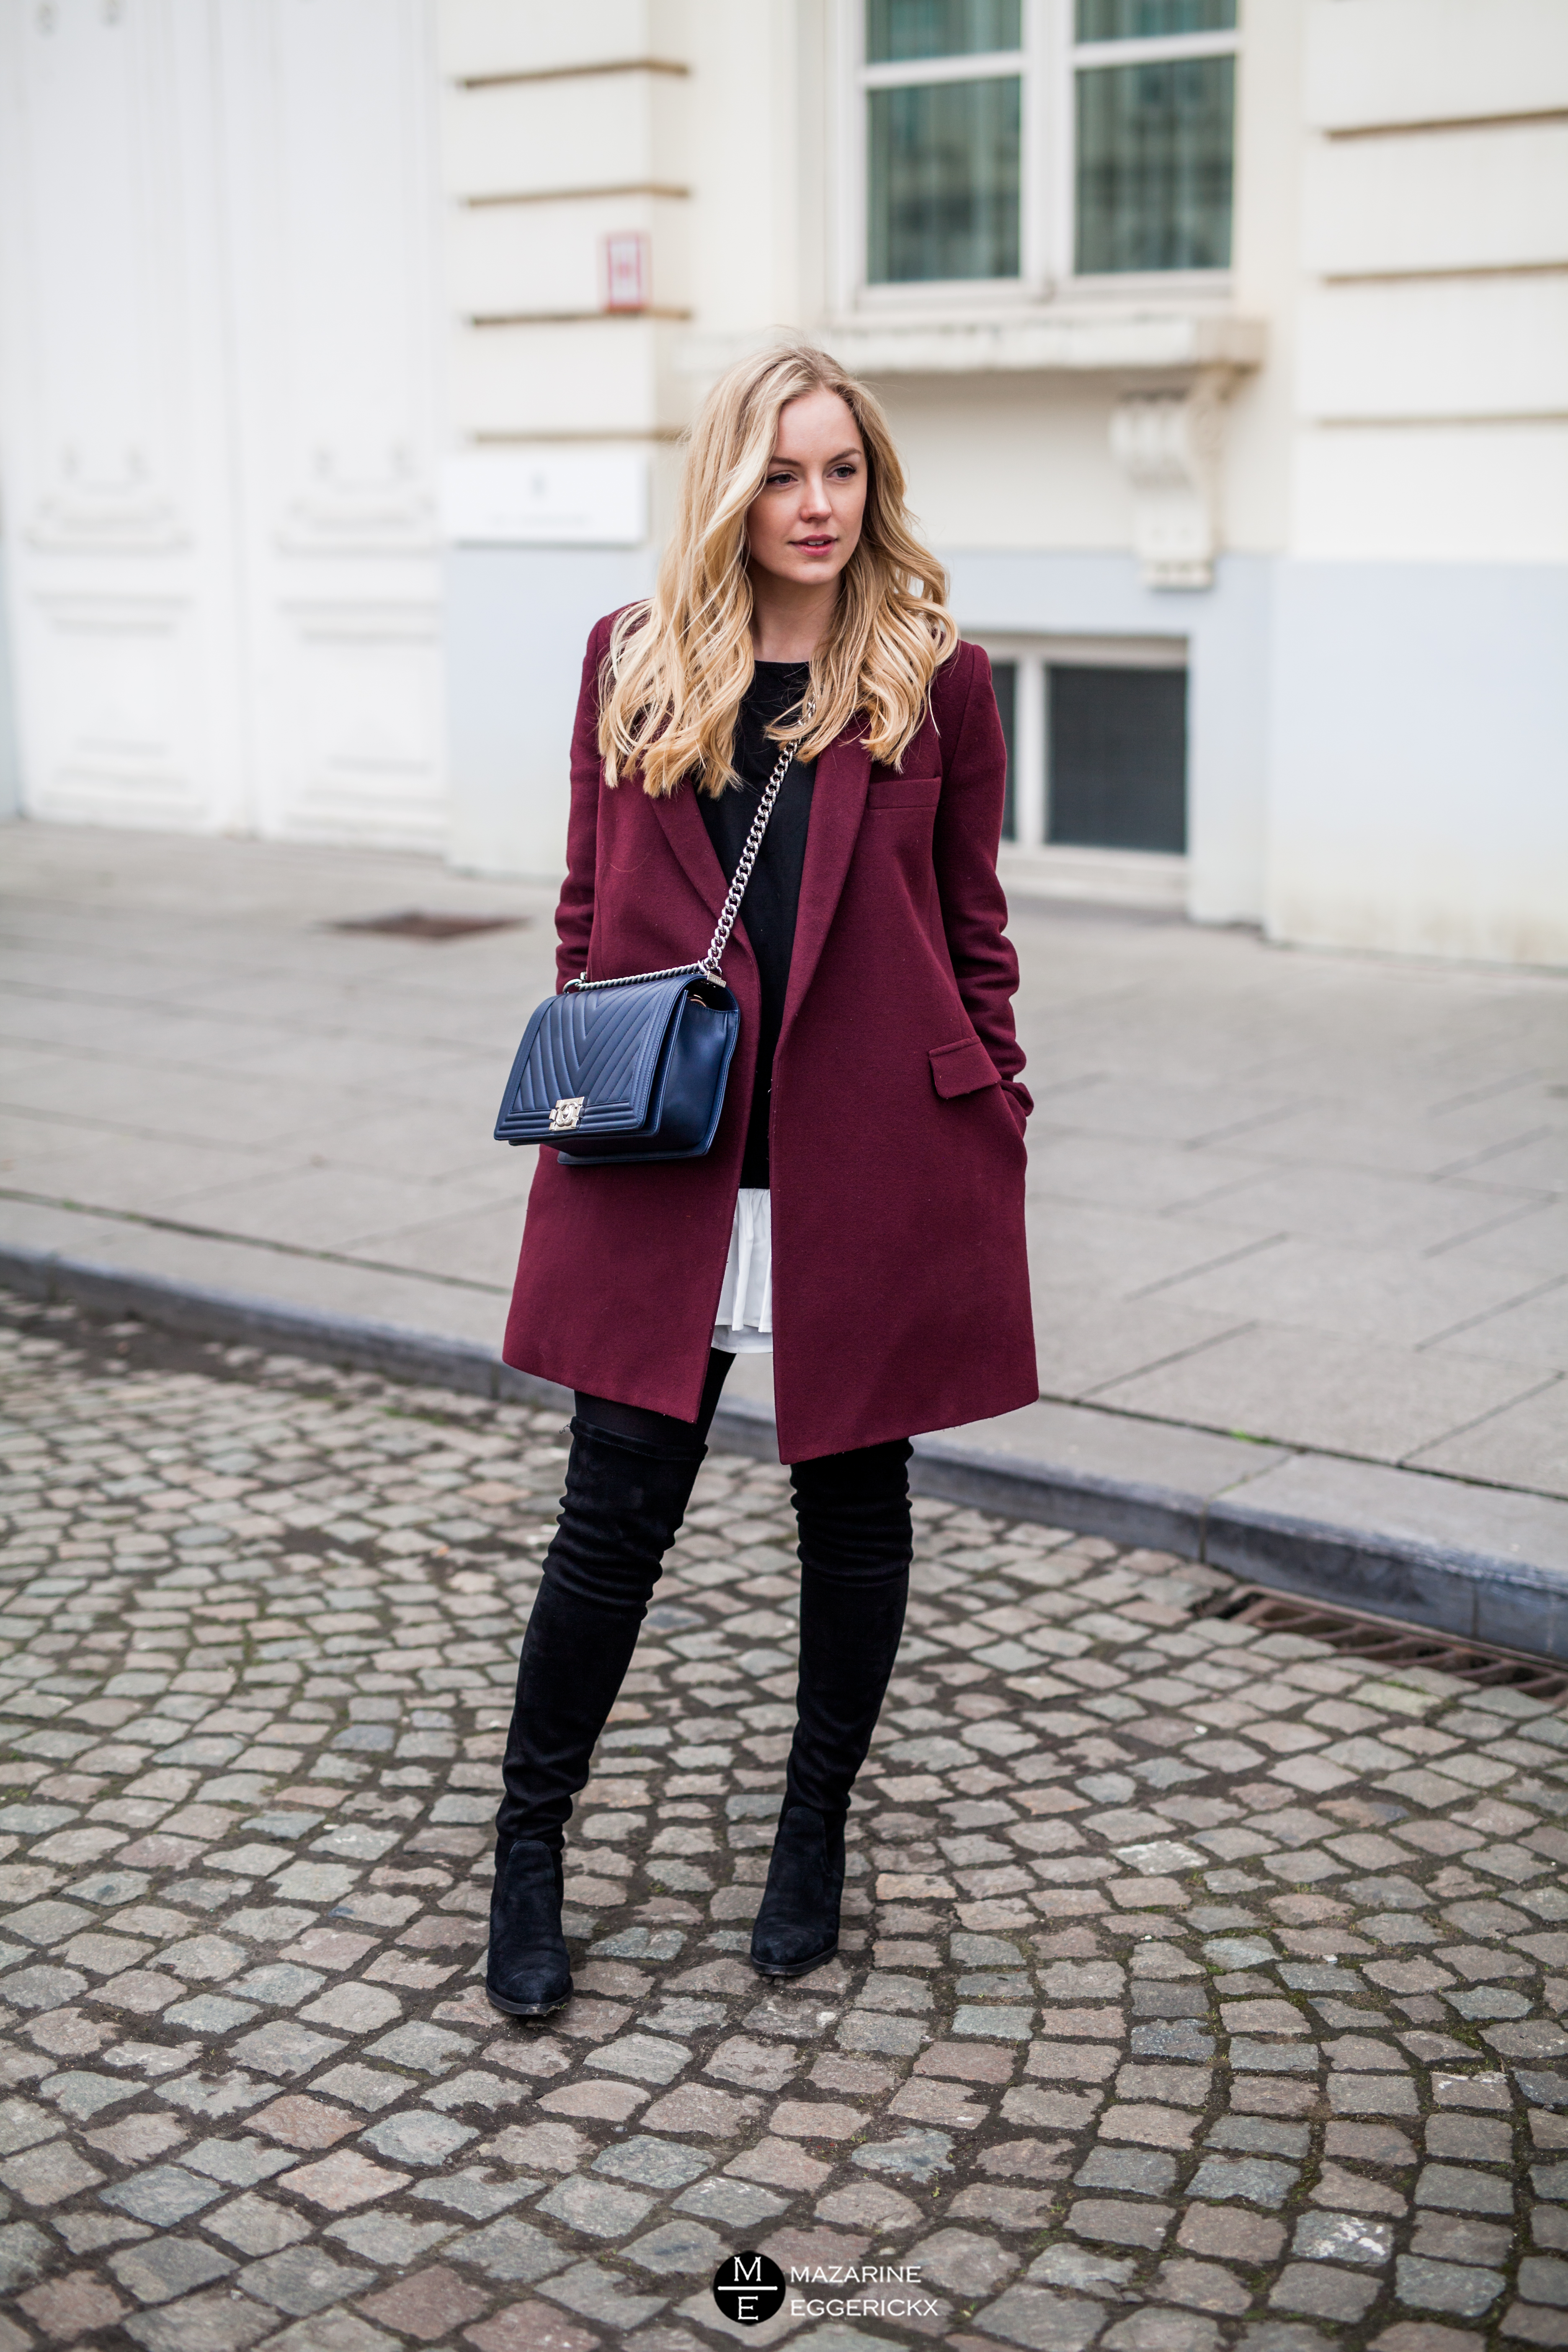 how to wear thigh high boots while being chic